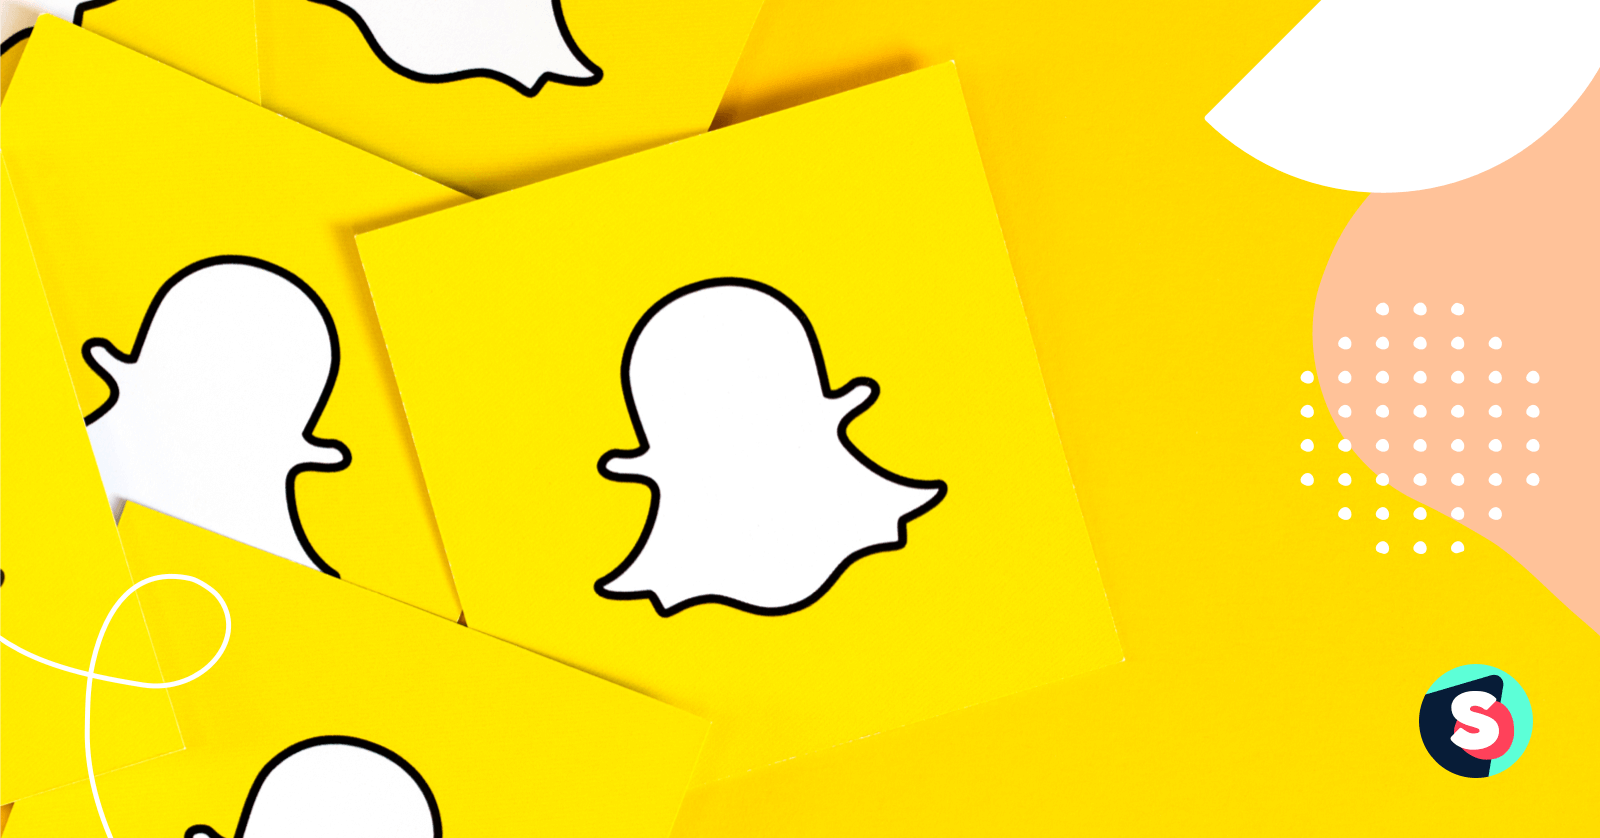 Official Snapchat Accounts Come With Special Perks